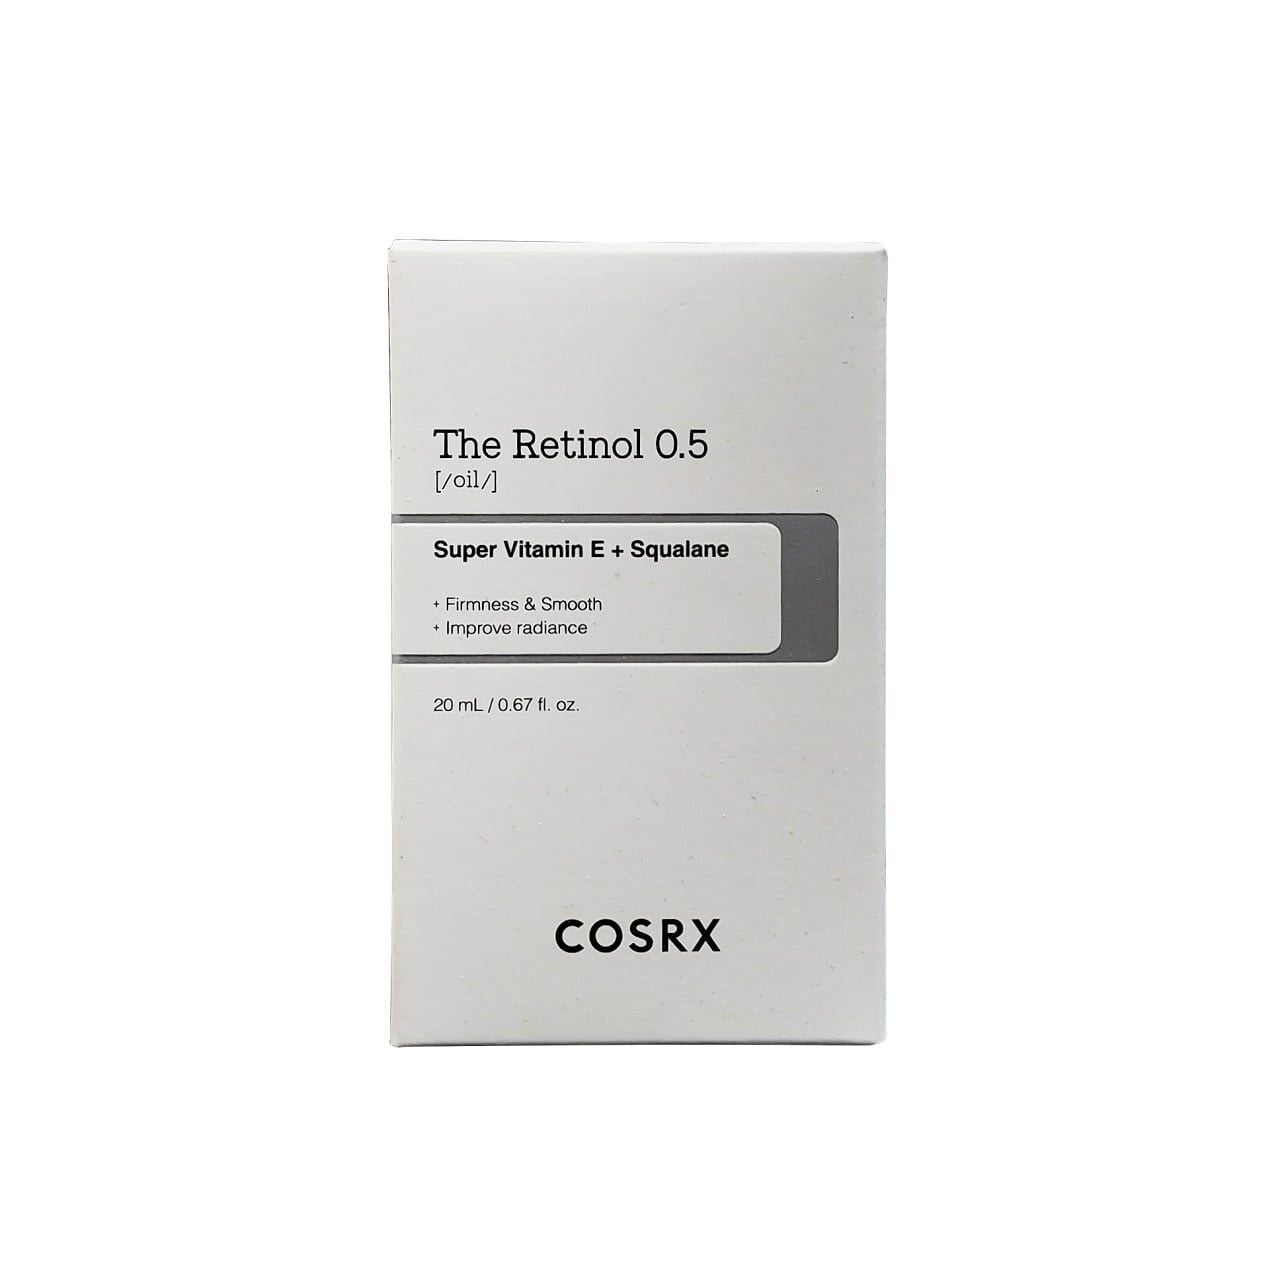 Product label for COSRX The Retinol 0.5 Oil (20 mL)